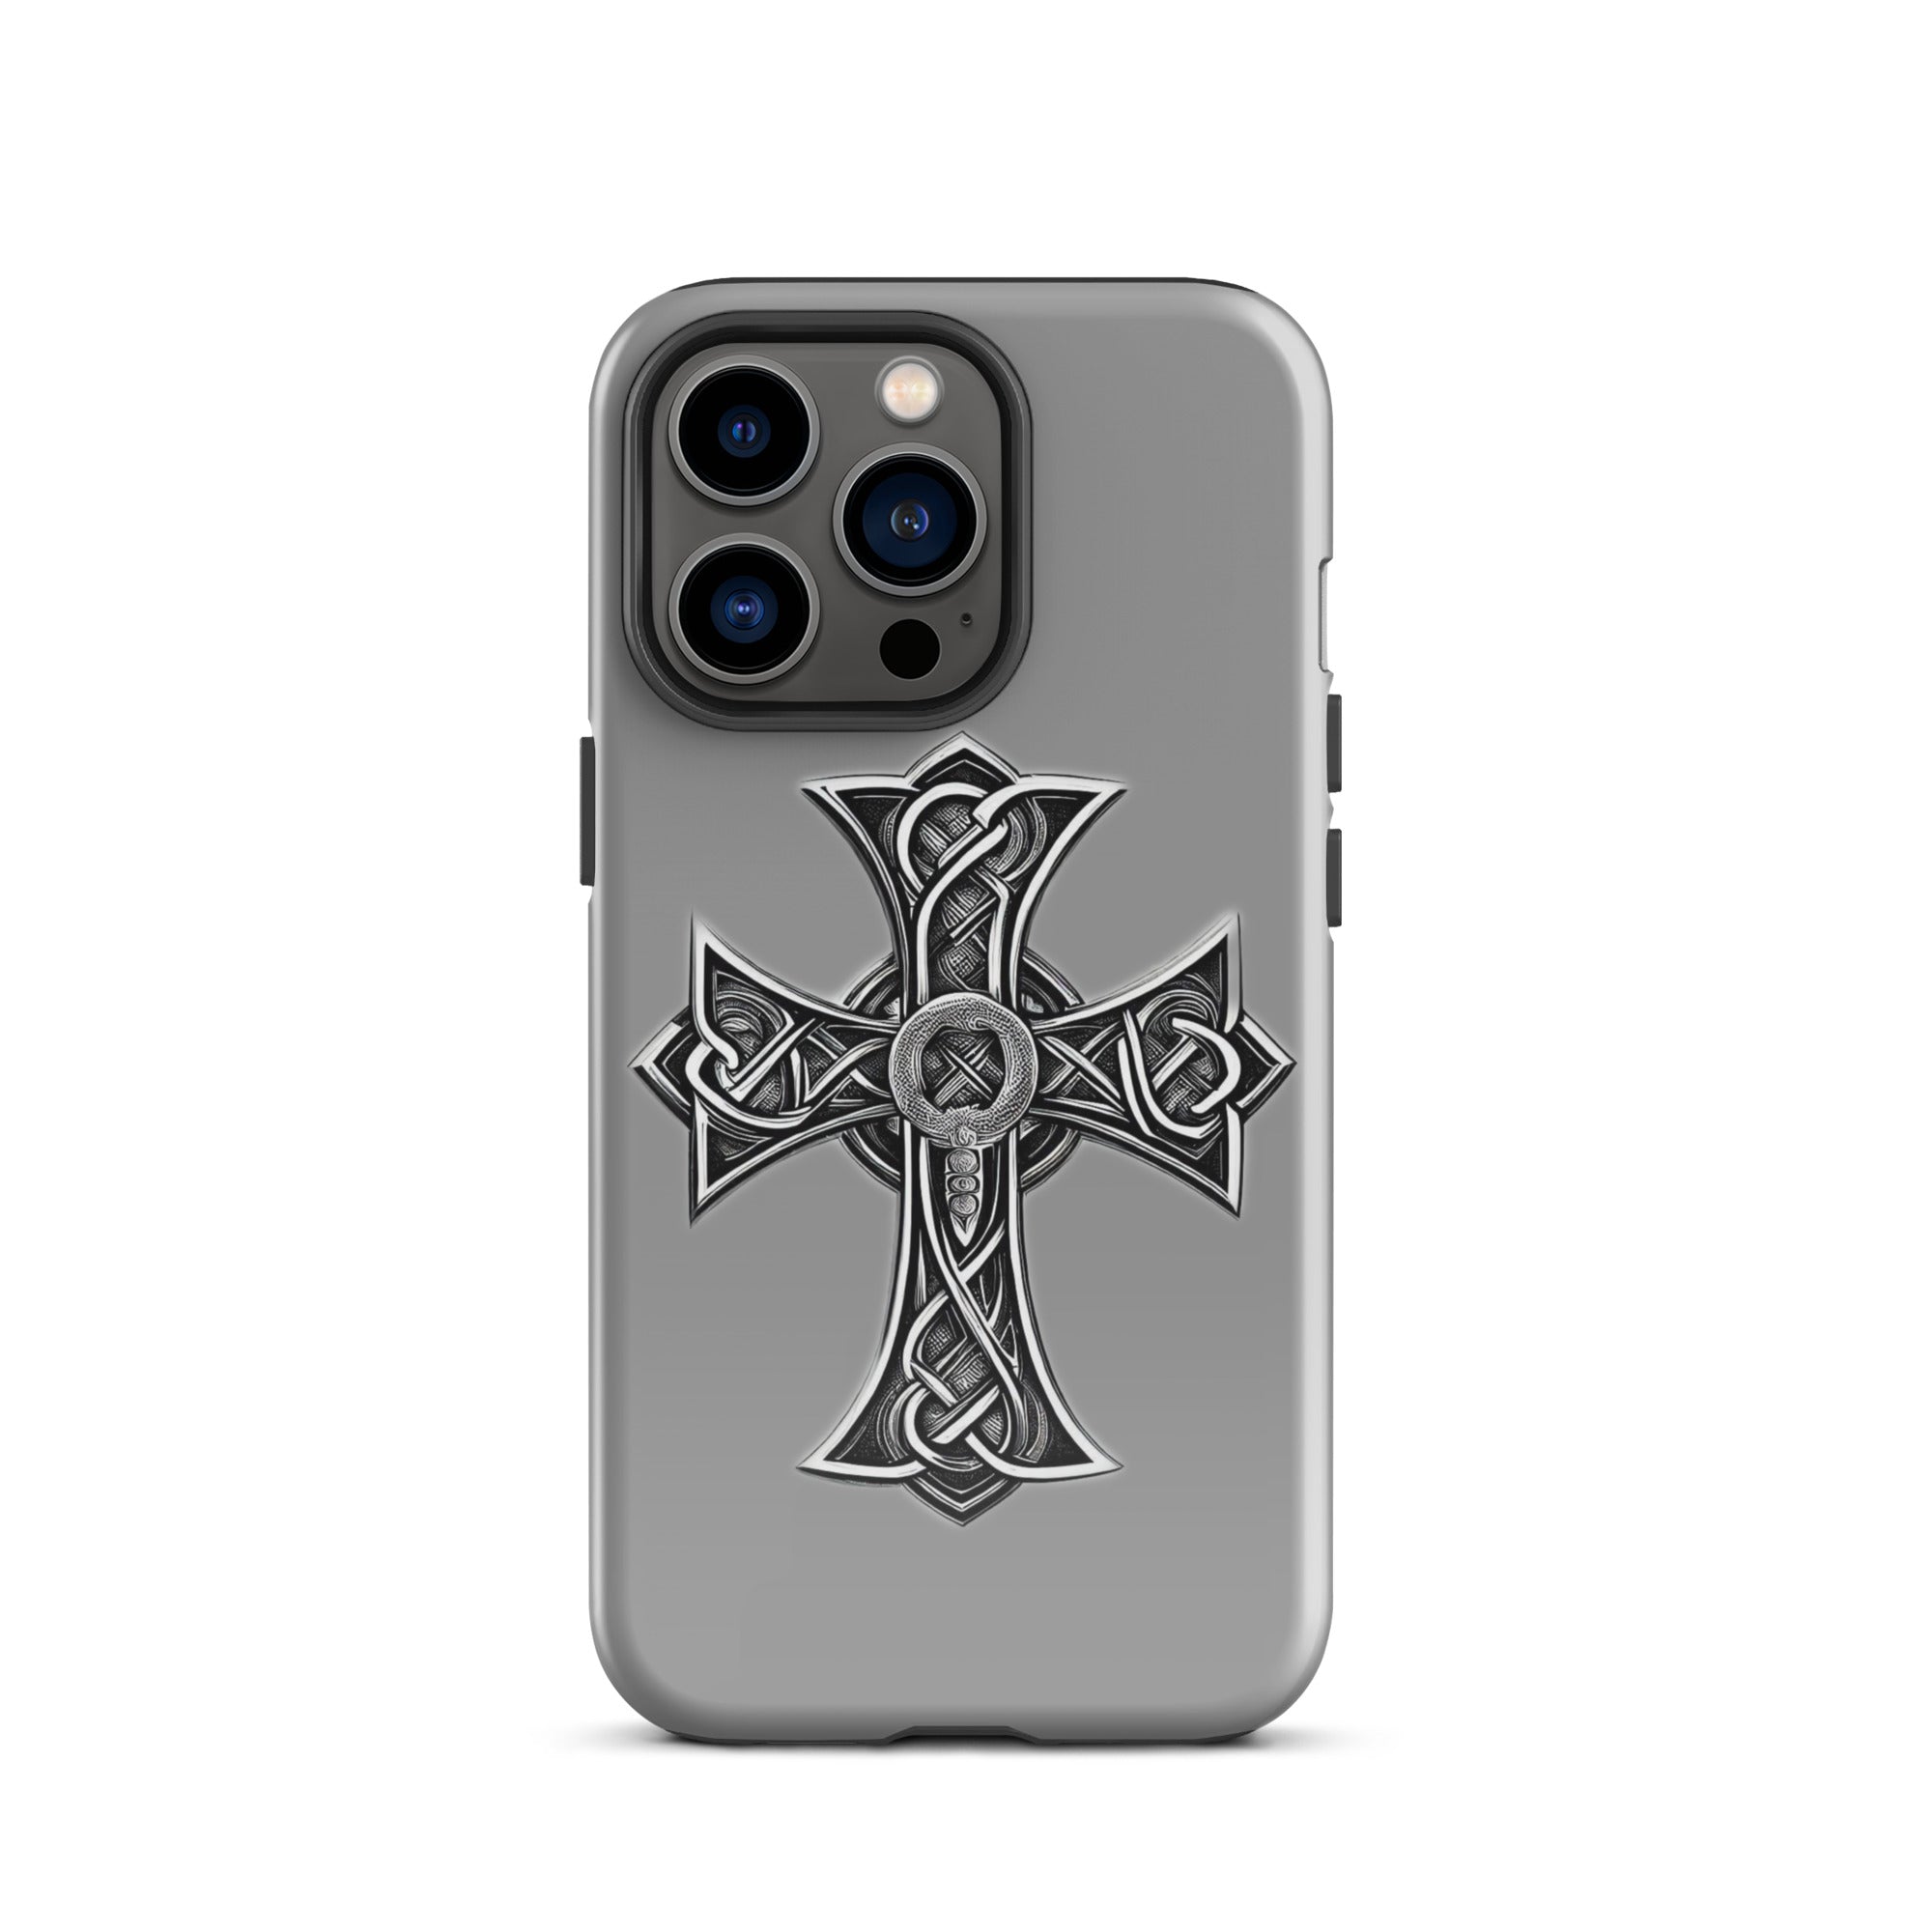 tough-case-for-iphone-glossy-iphone-13-pro-front-65638477141b6.jpg